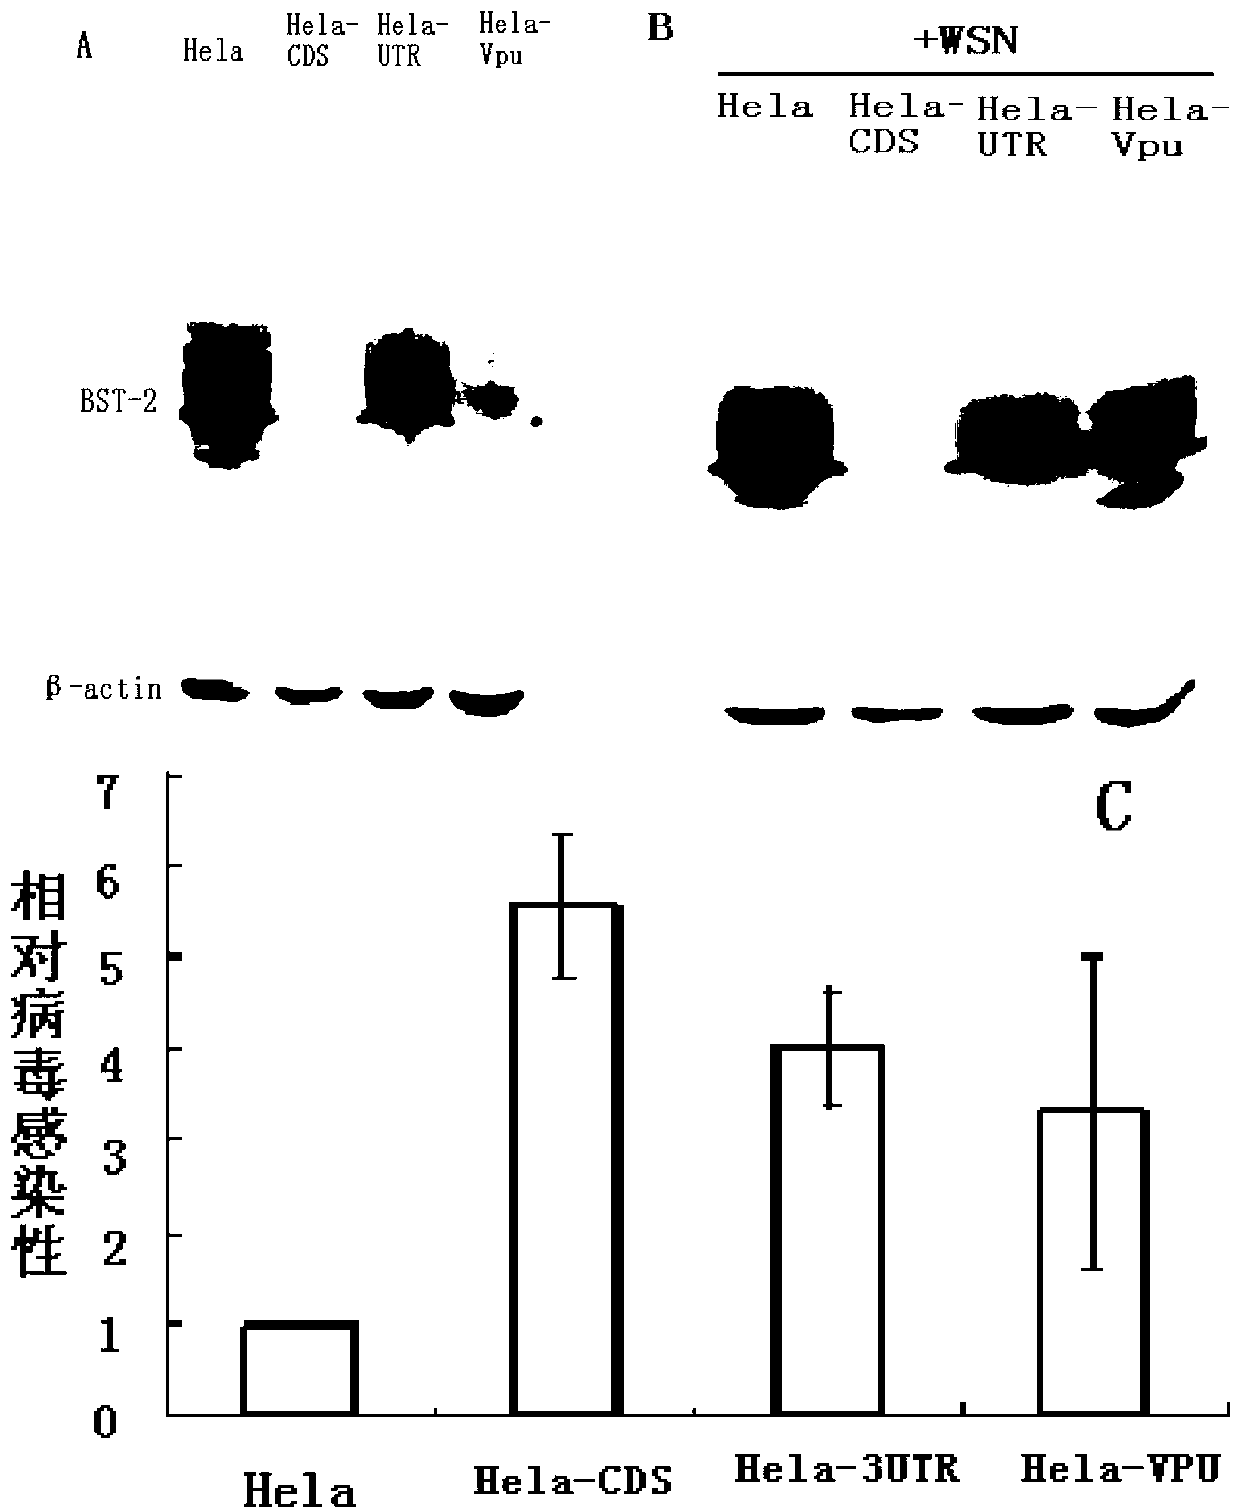 Application of BST-2 protein in preparing medicaments for treating diseases caused by influenza A virus